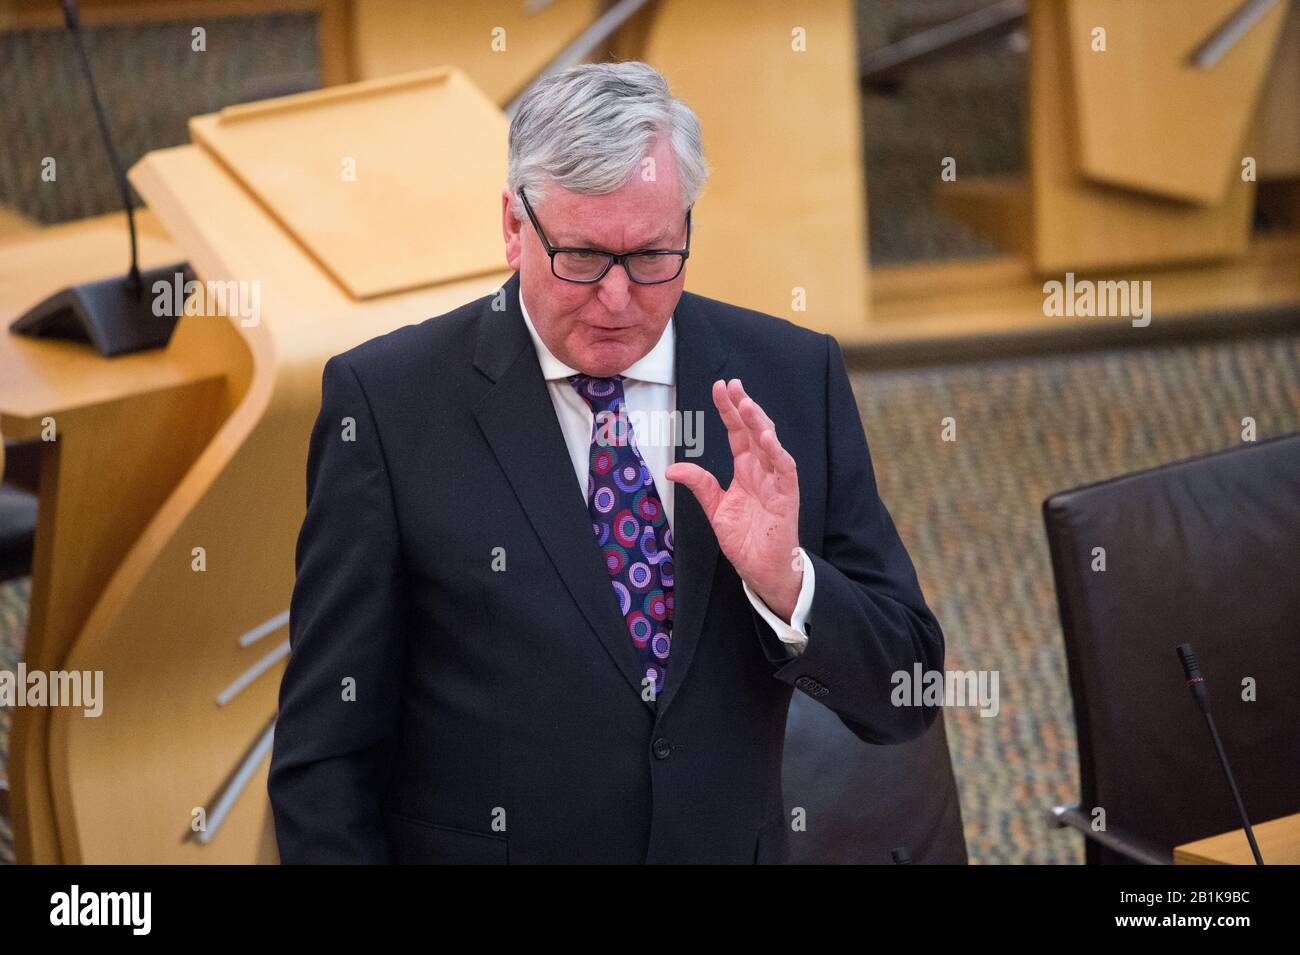 Edinburgh, UK. 26th Feb, 2020. Pictured: Fergus Ewing MSP - Cabinet Secretary for the Rural Economy. Ministerial Statement: Modernising and Empowering Scotland's Inshore Fisheries. Scenes from inside the debating chamber of the Scottish Parliament. Credit: Colin Fisher/Alamy Live News Stock Photo